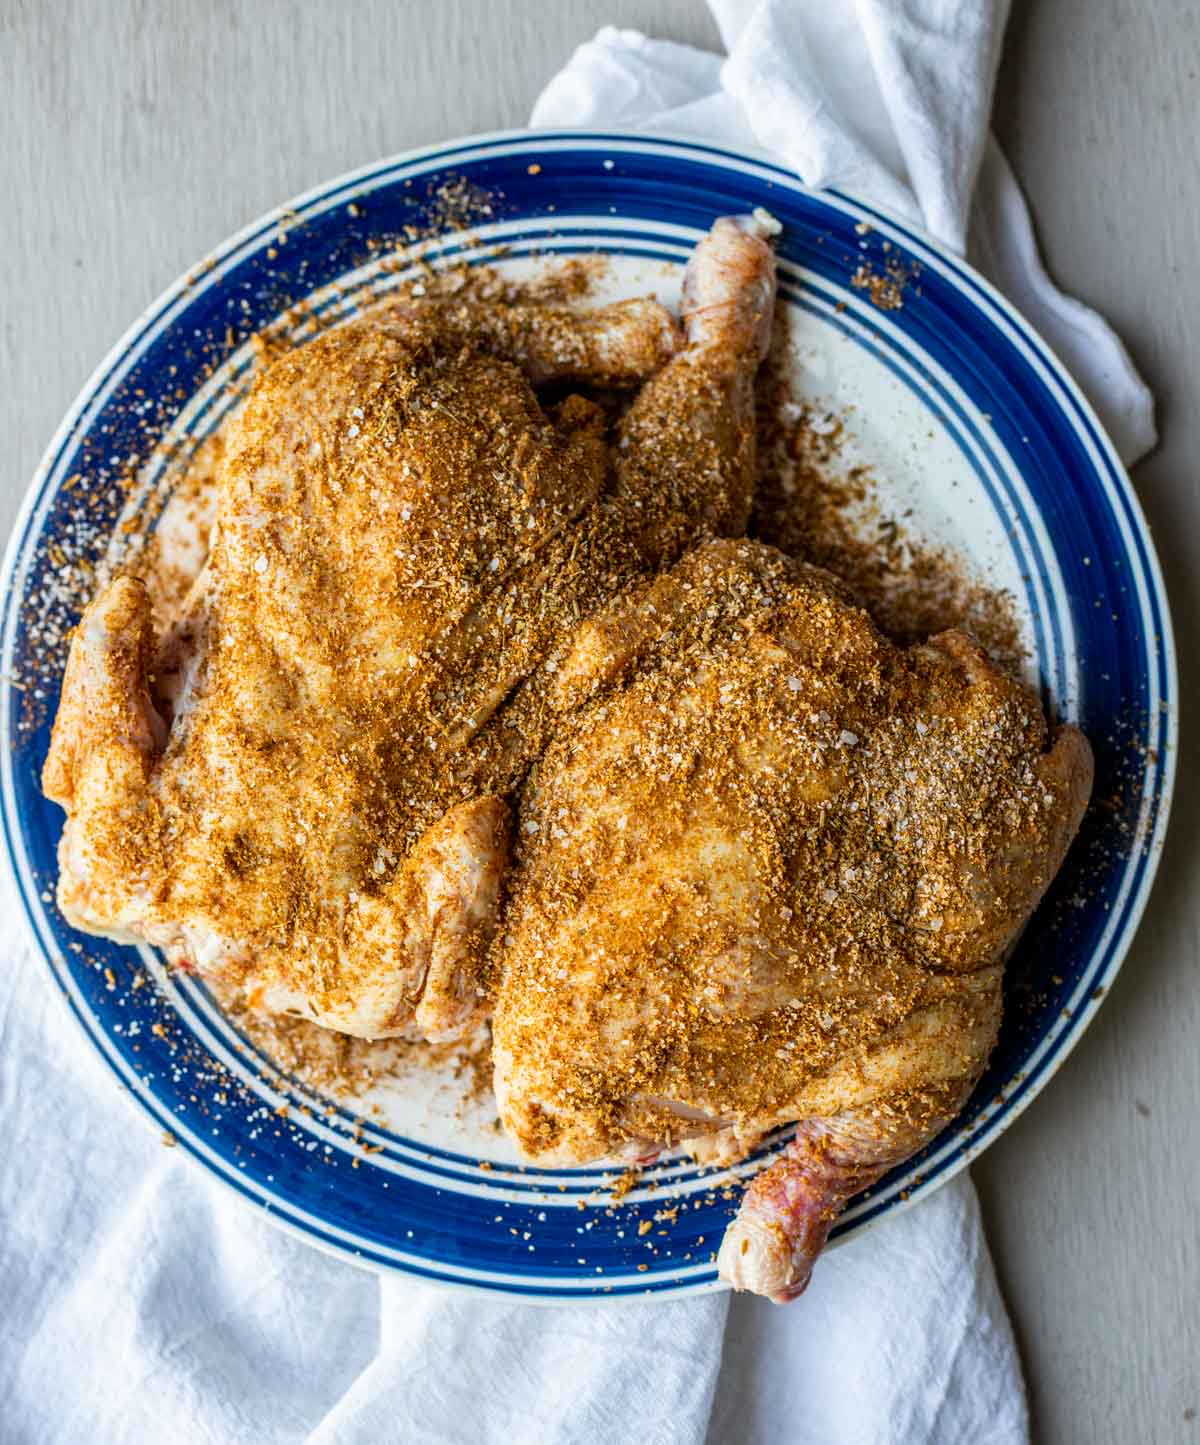 Two cornish hens seasoned with spices and resting on a plate.